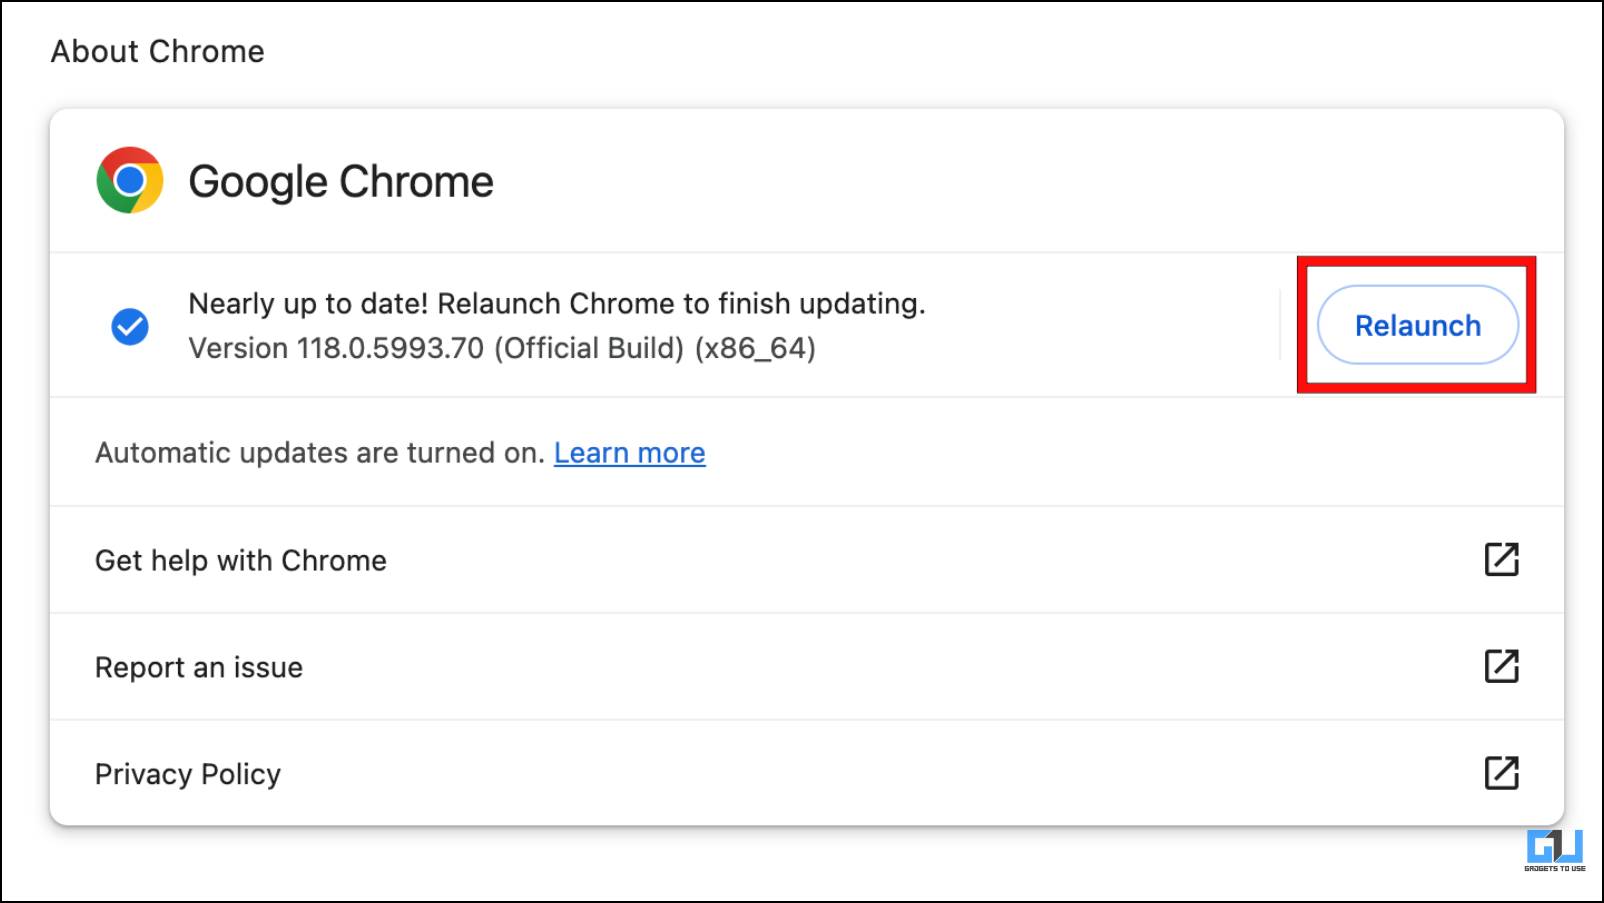 Relaunch Google Chrome to Apply Changes